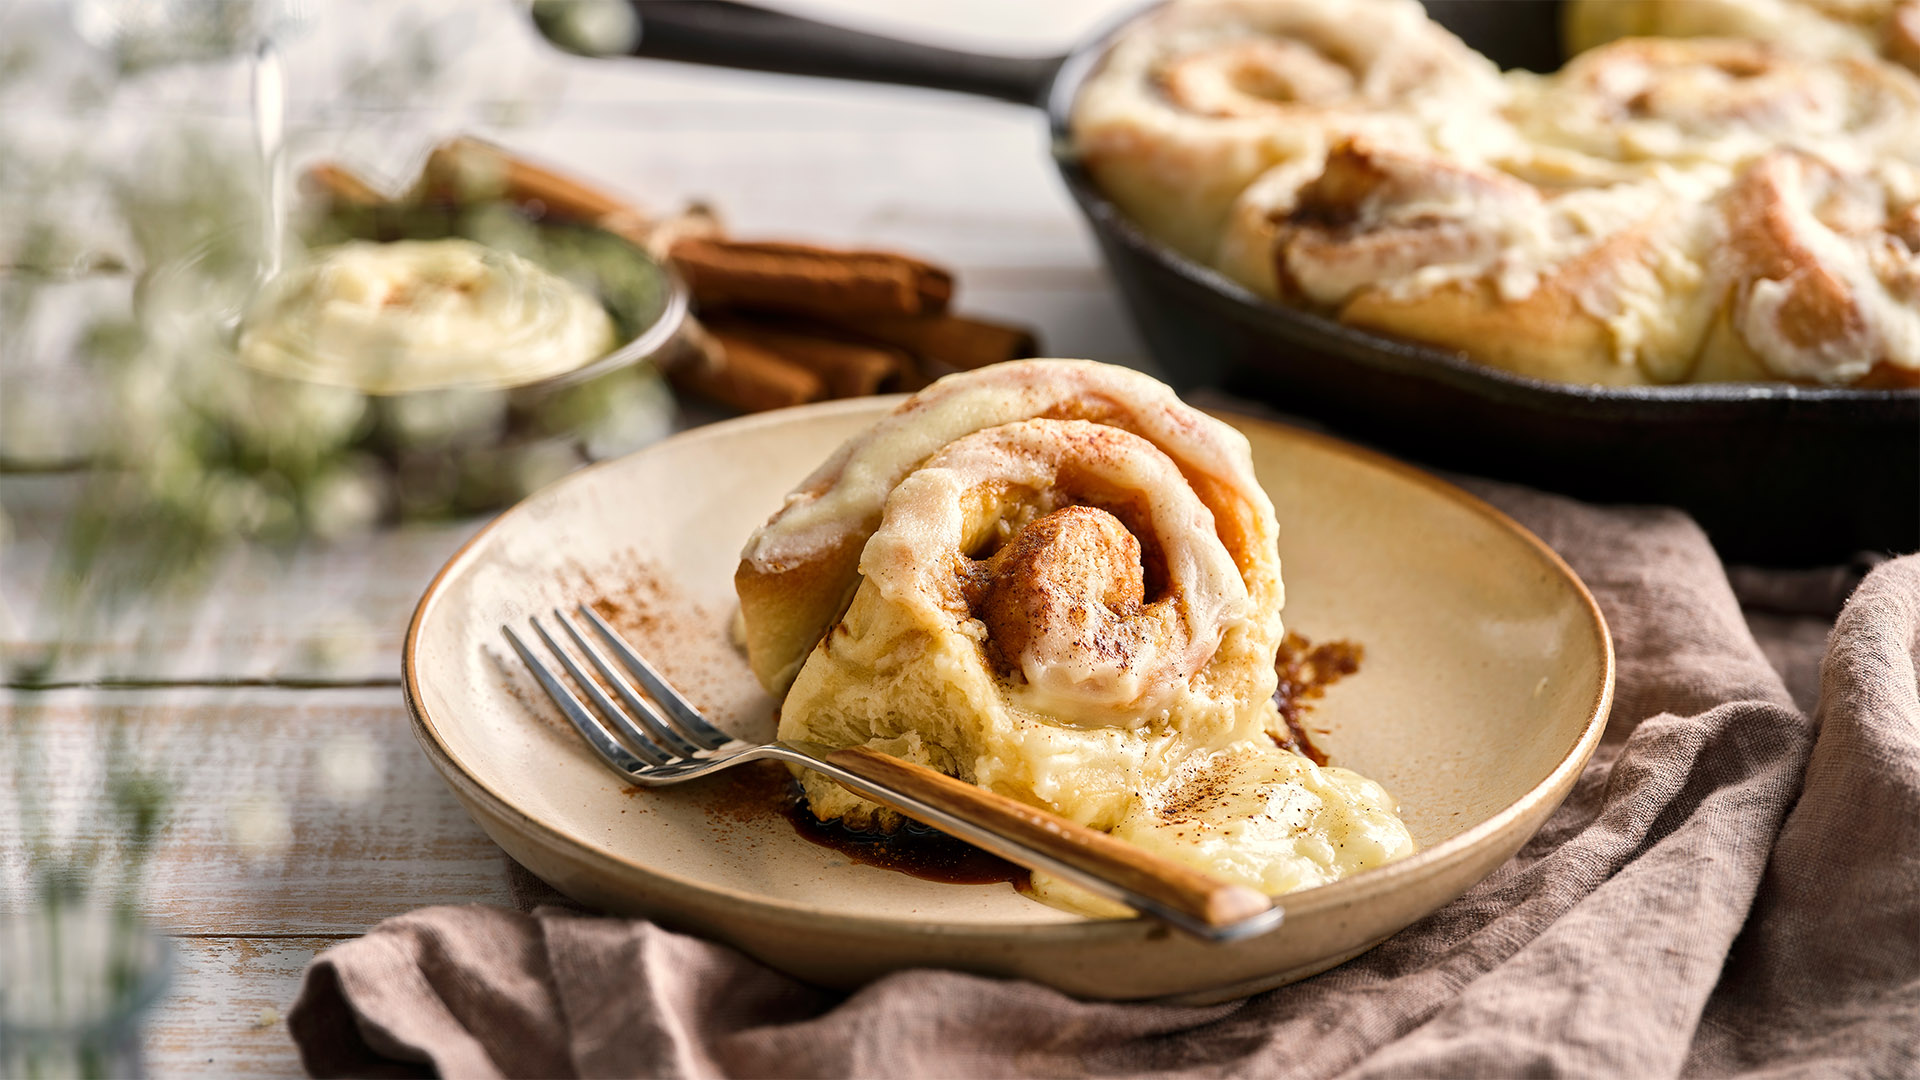 A cast iron pan is filled with Mascarpone Brioche Cinnamon Rolls and sits next to a plate with a serving.